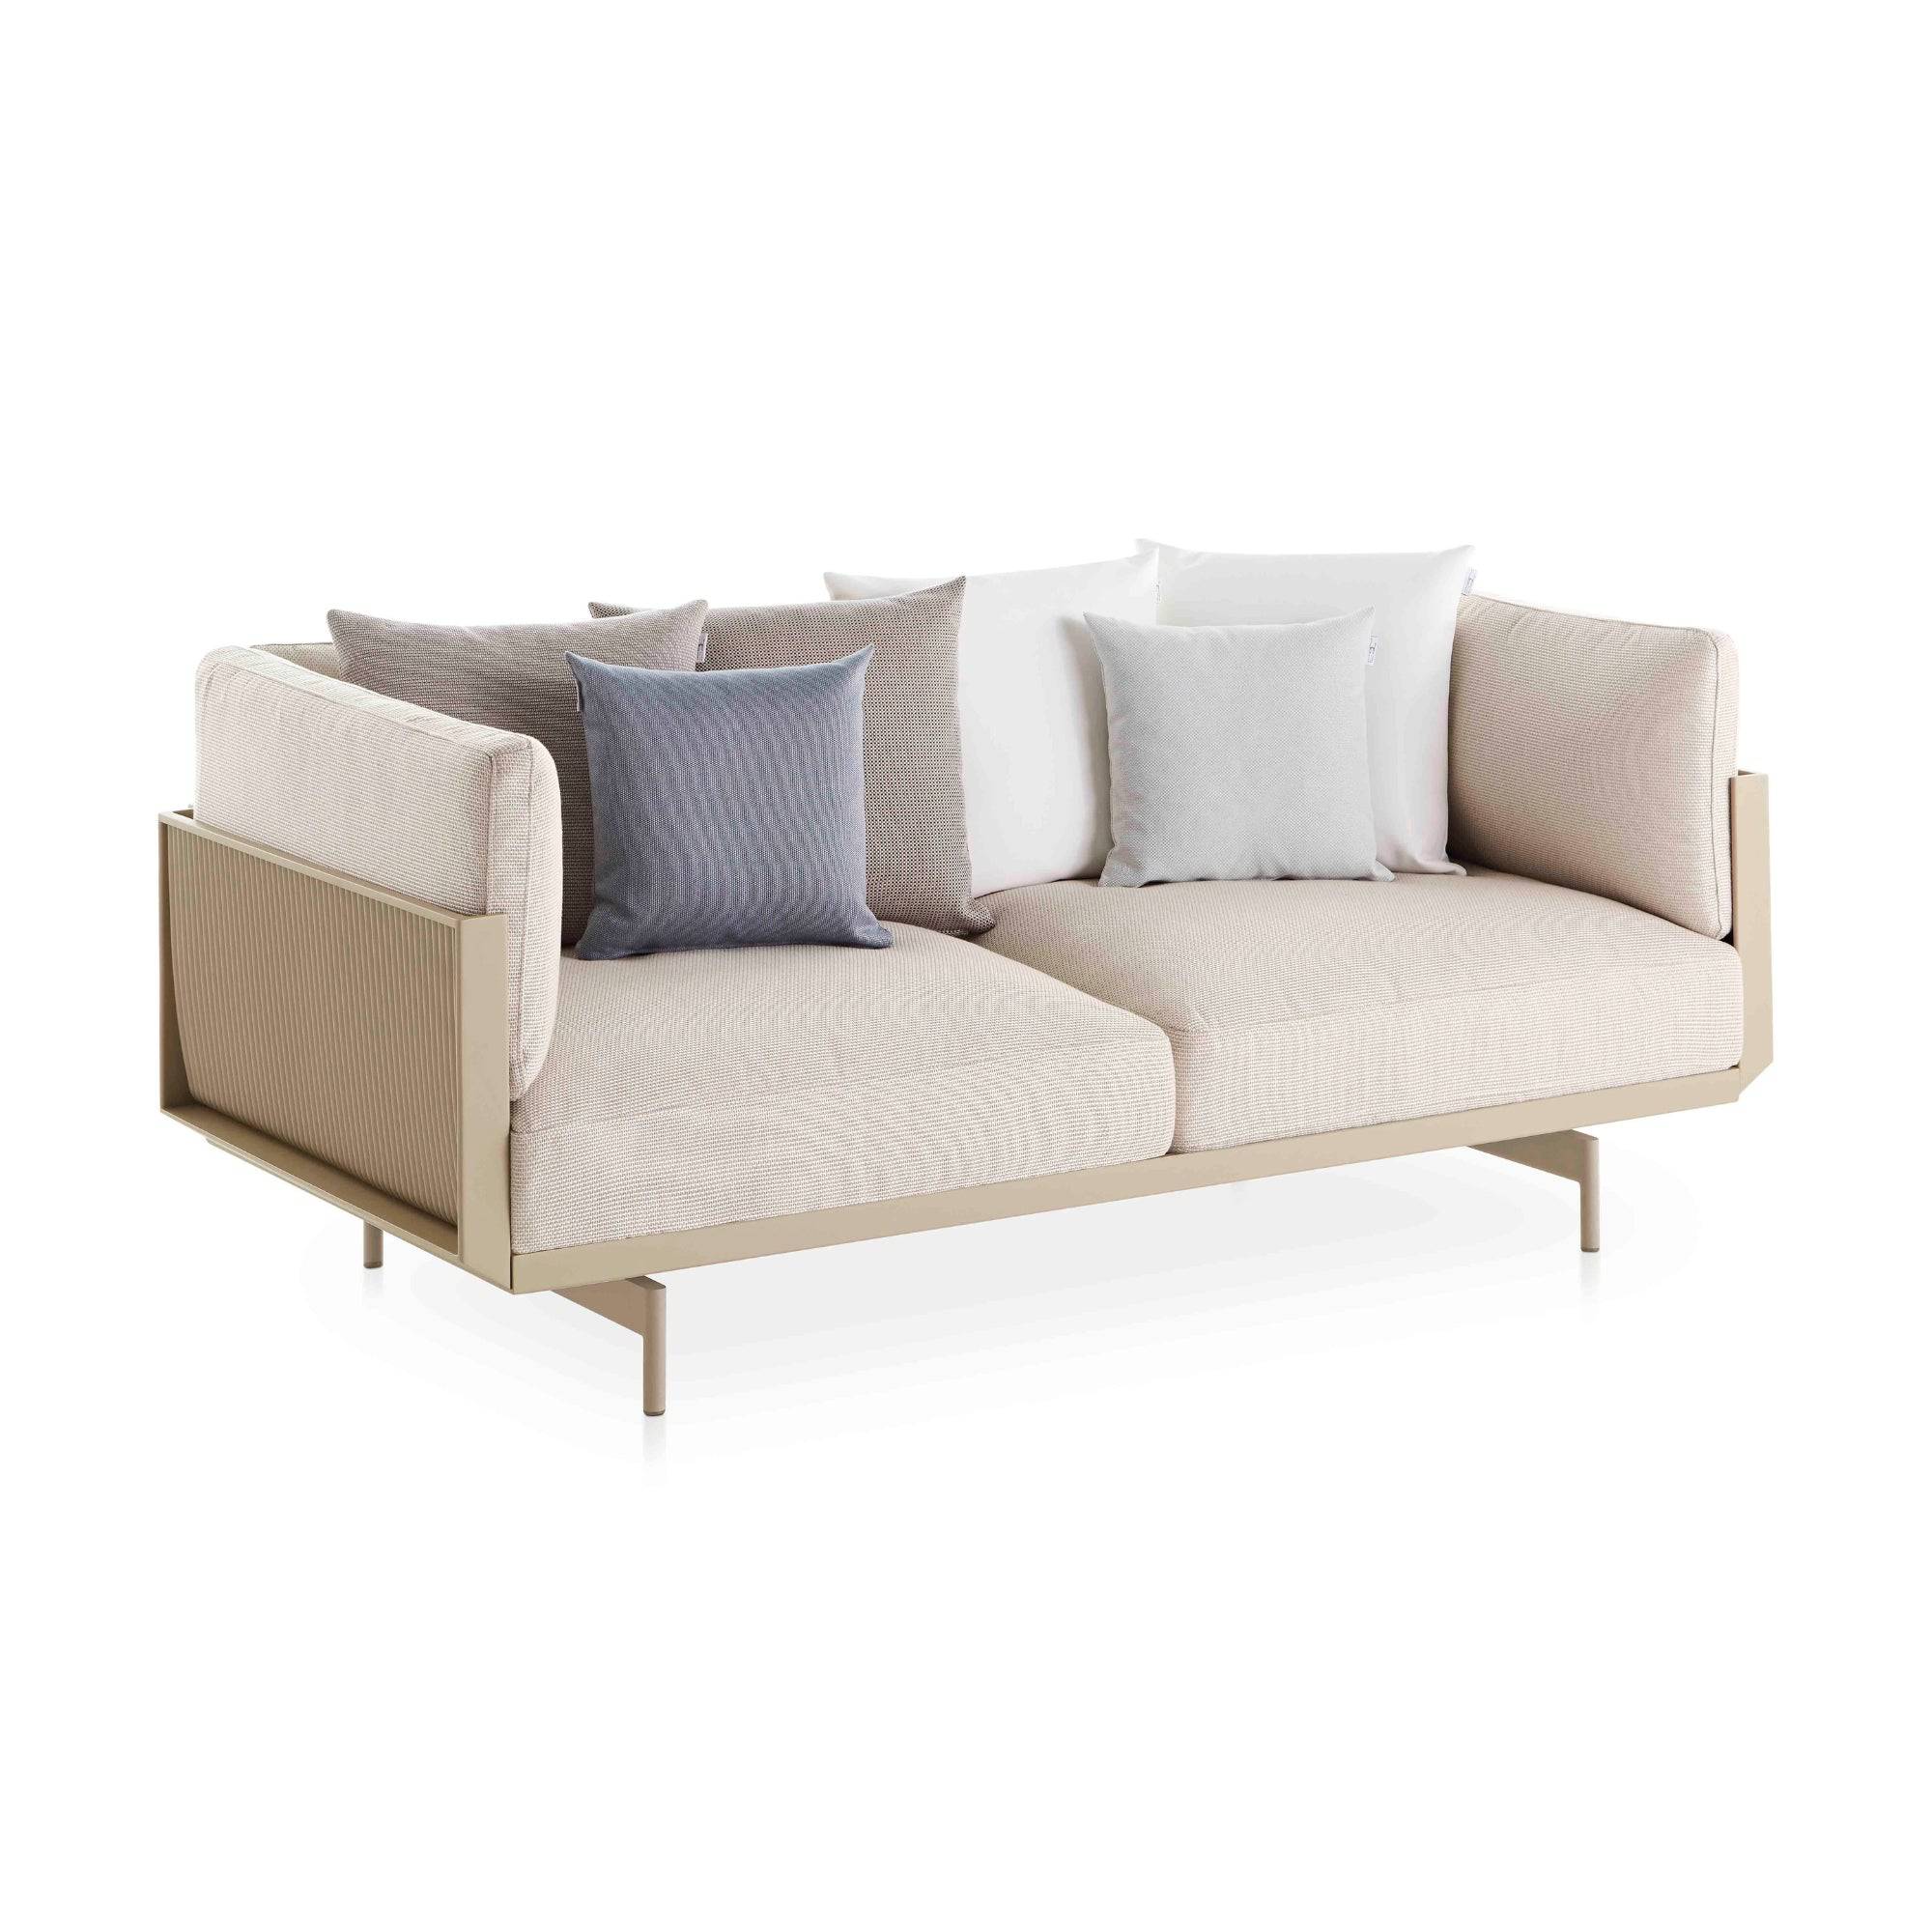 Onde 2-seater Sofa - THAT COOL LIVING